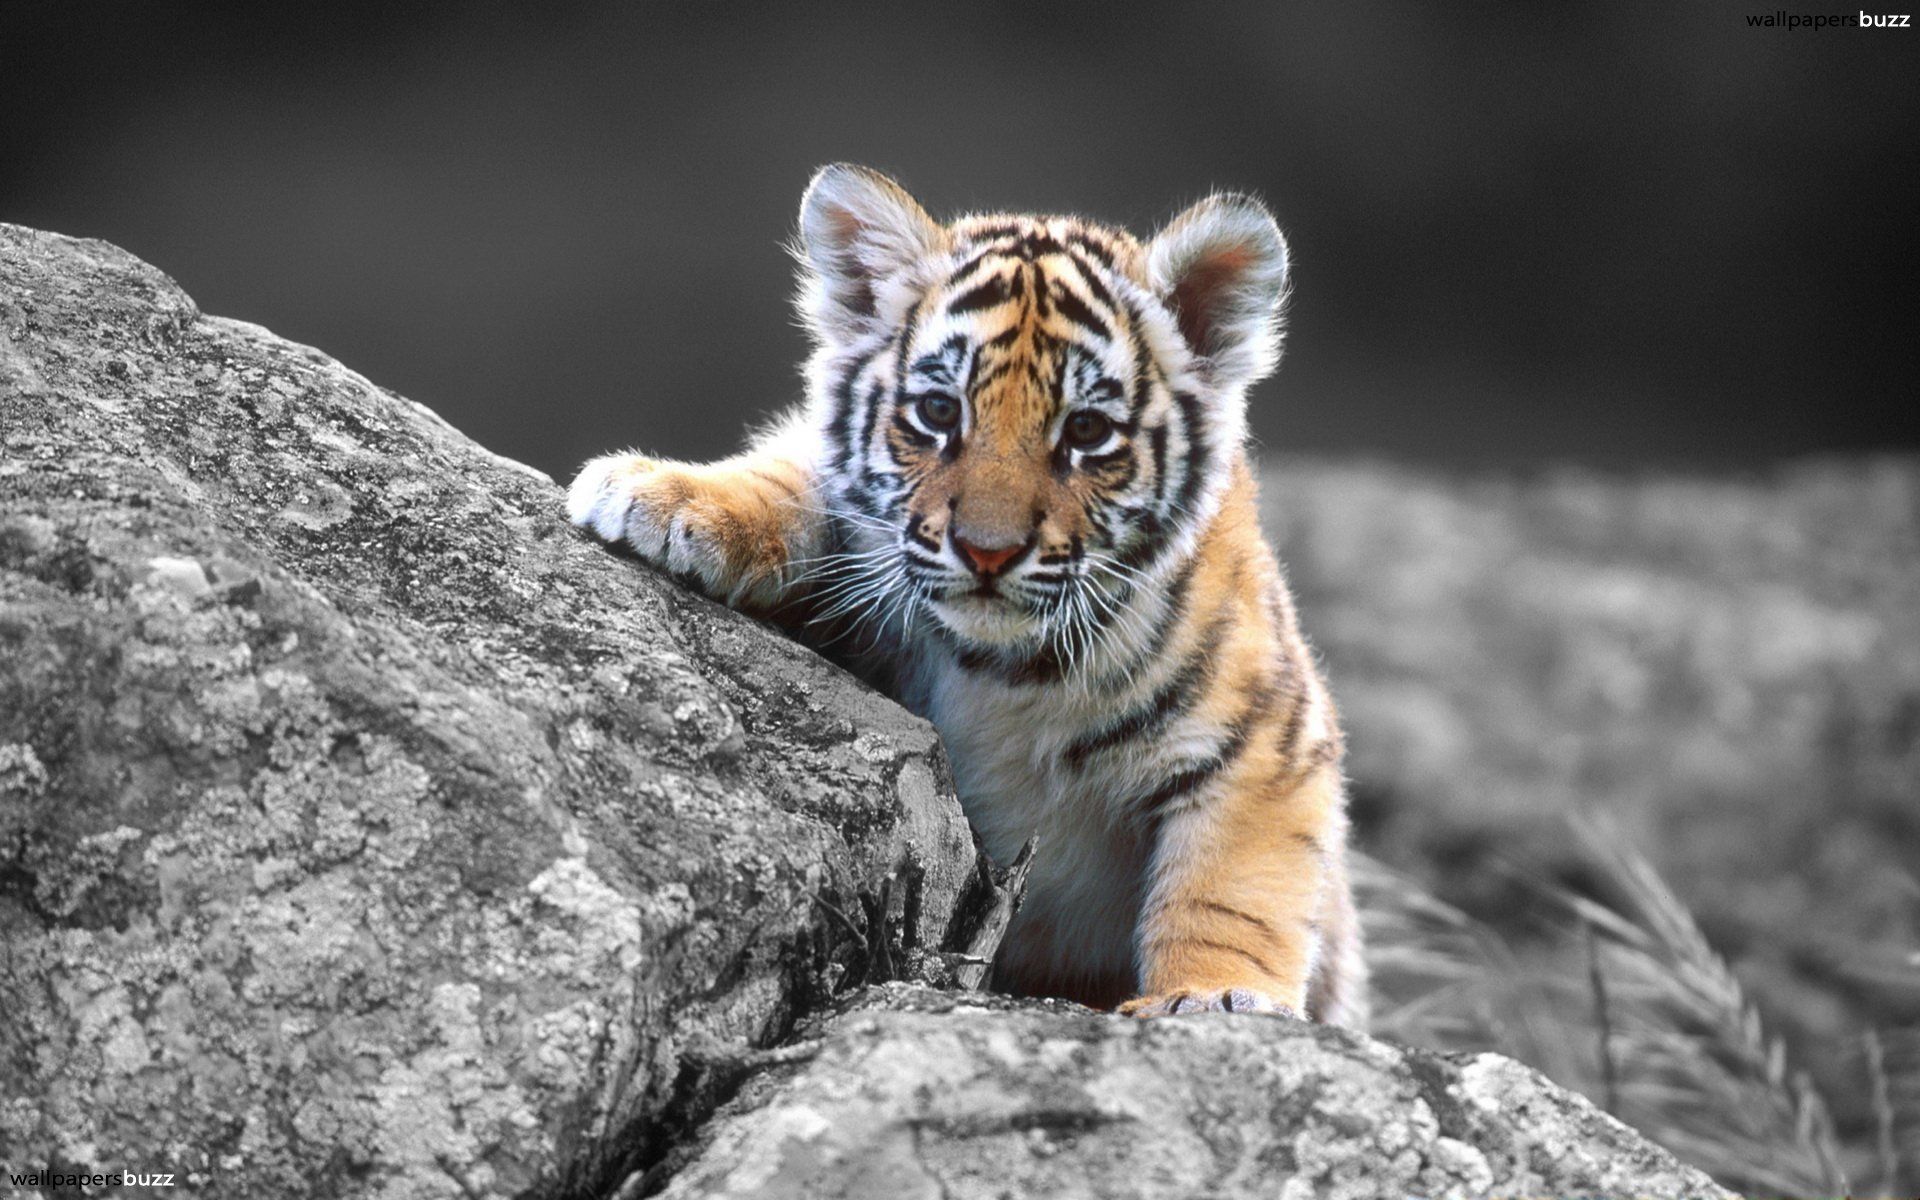 Tiger Wallpapers Hd Free Download - Widescreen HD Backgrounds